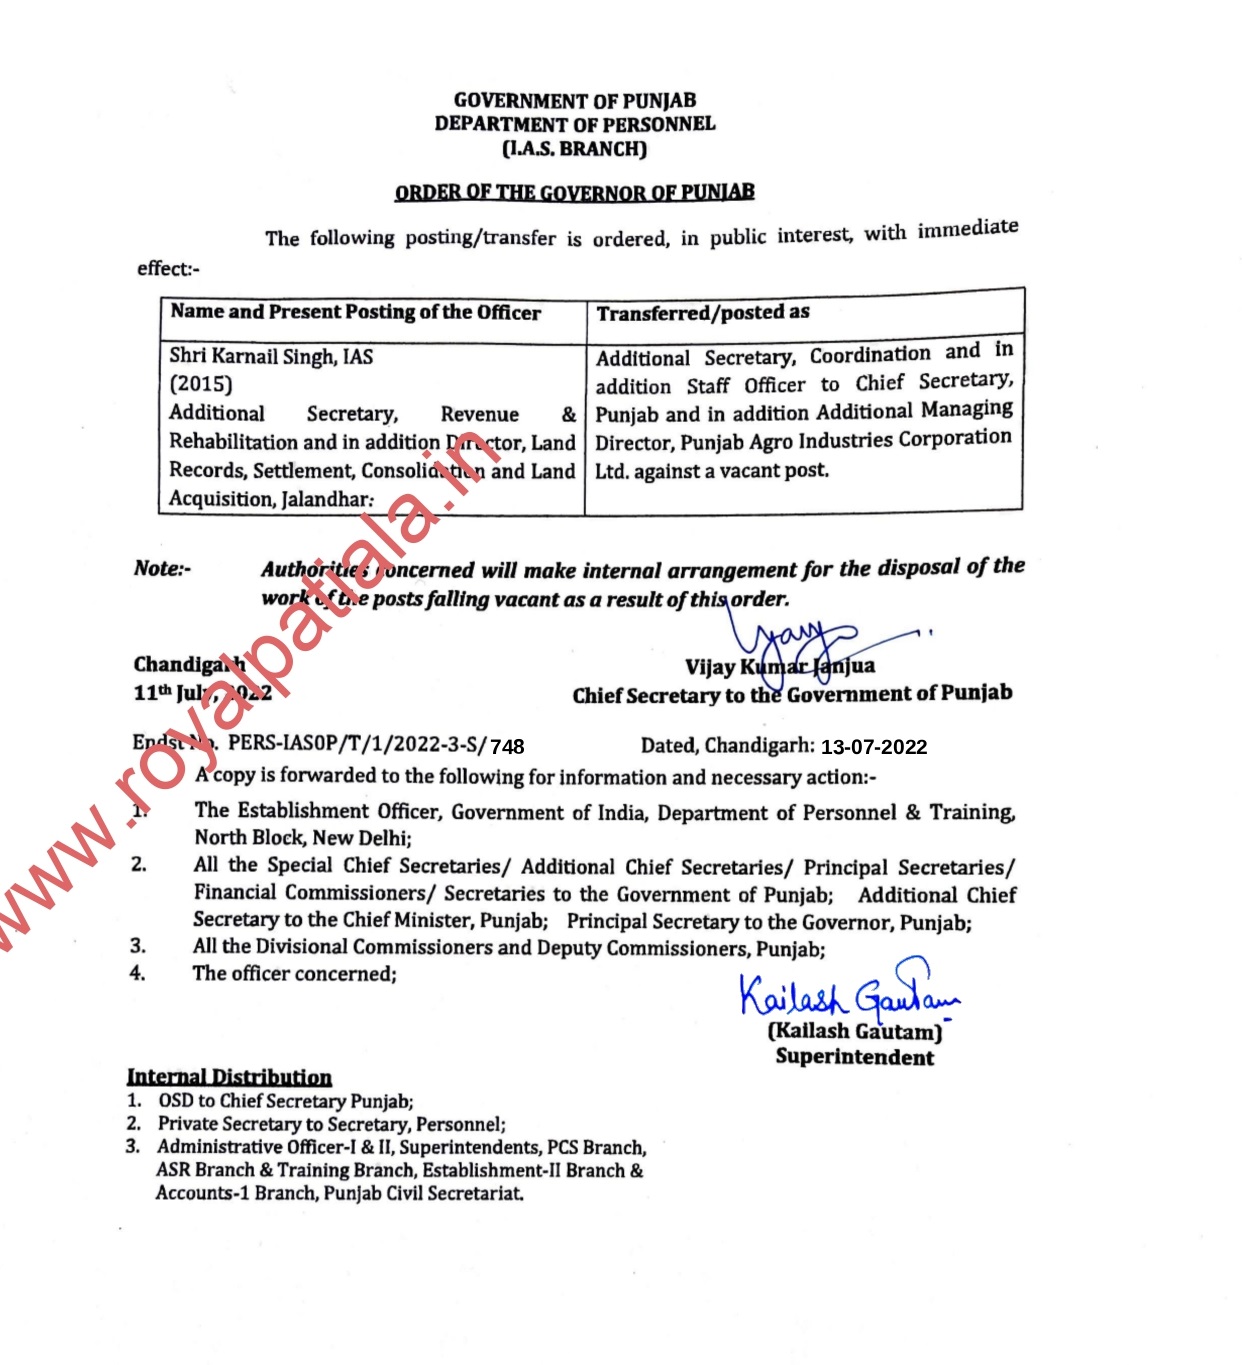 IAS officer appointed as Staff Officer to Chief Secretary, Punjab